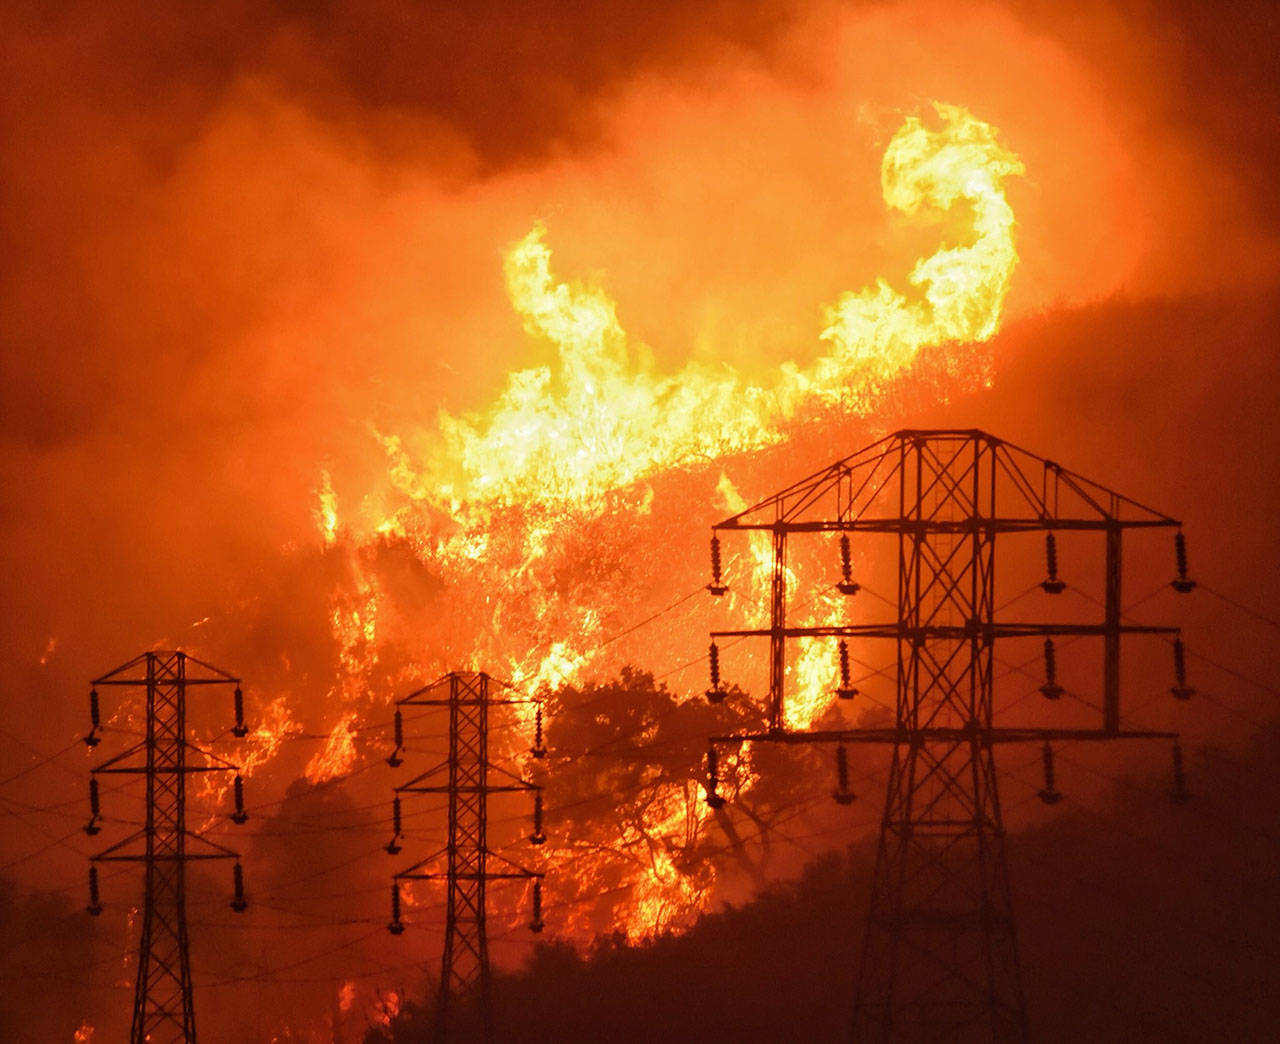 In this 2017 photo, flames burn near power lines in Sycamore Canyon near West Mountain Drive in Montecito, California. (Mike Eliason/Santa Barbara County Fire Department via AP, File)